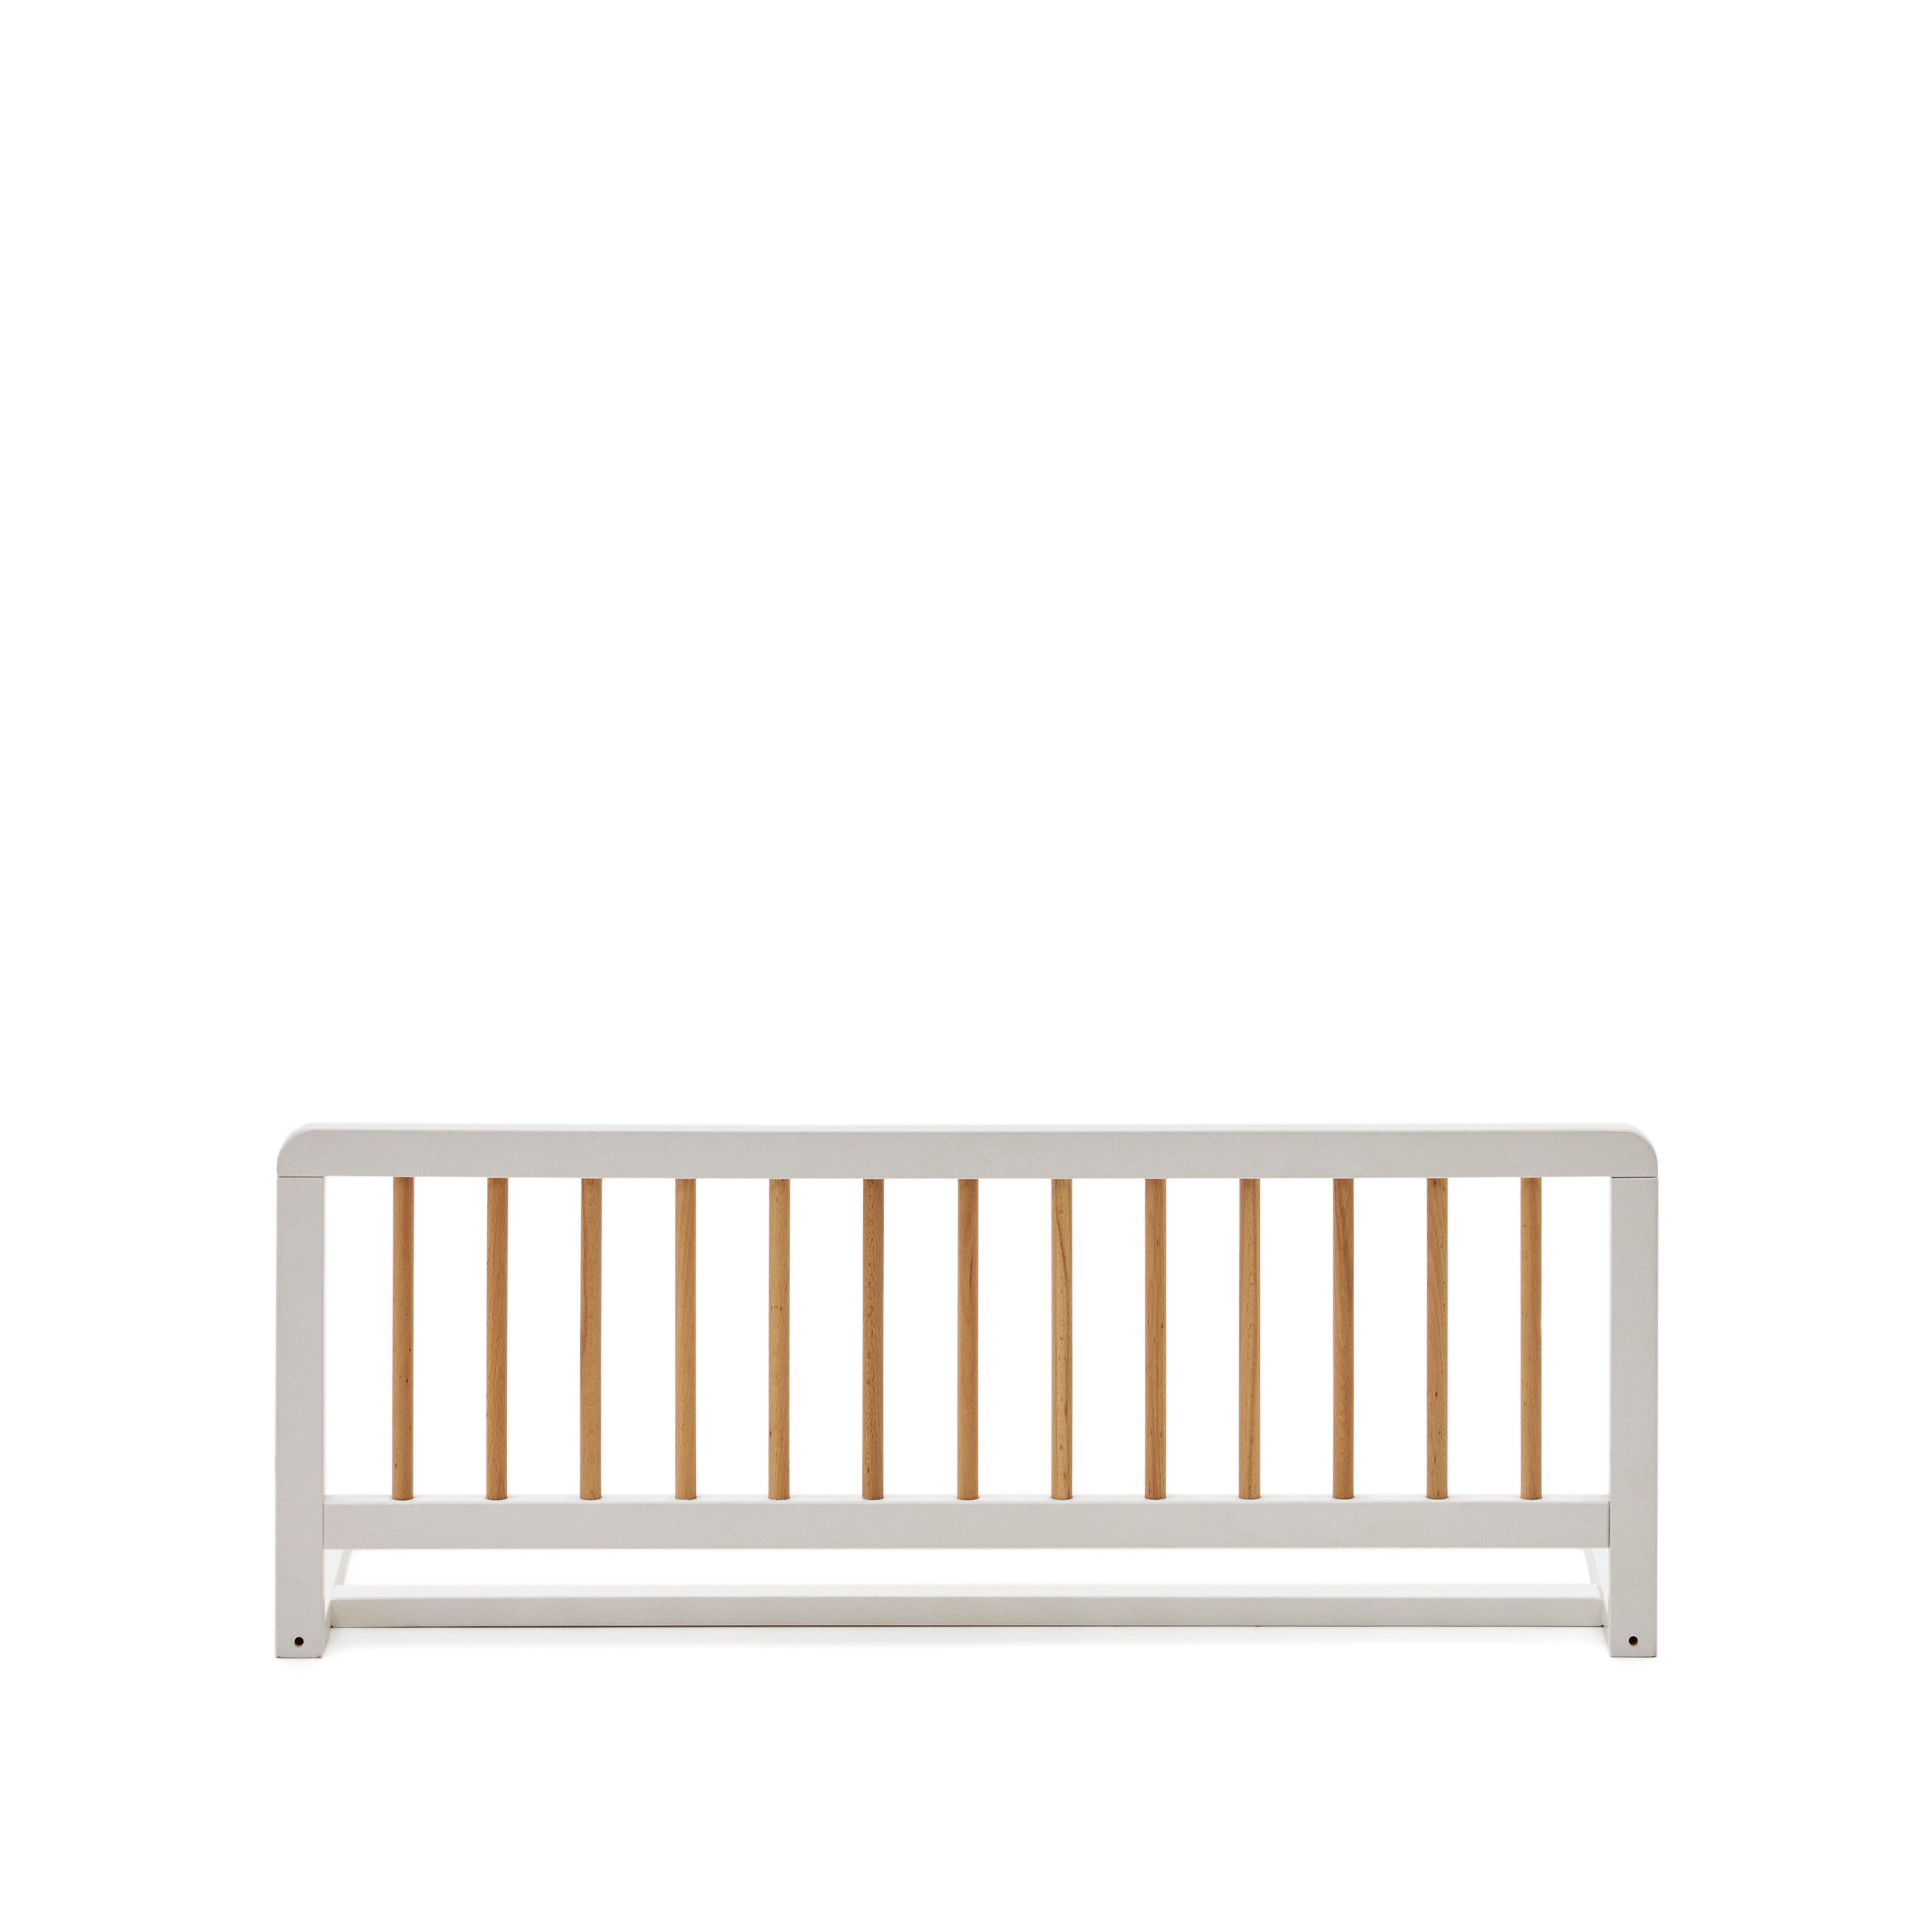 Tiphaine solid beech wood bed safety barrier with natural and white finish, 100 x 40 cm